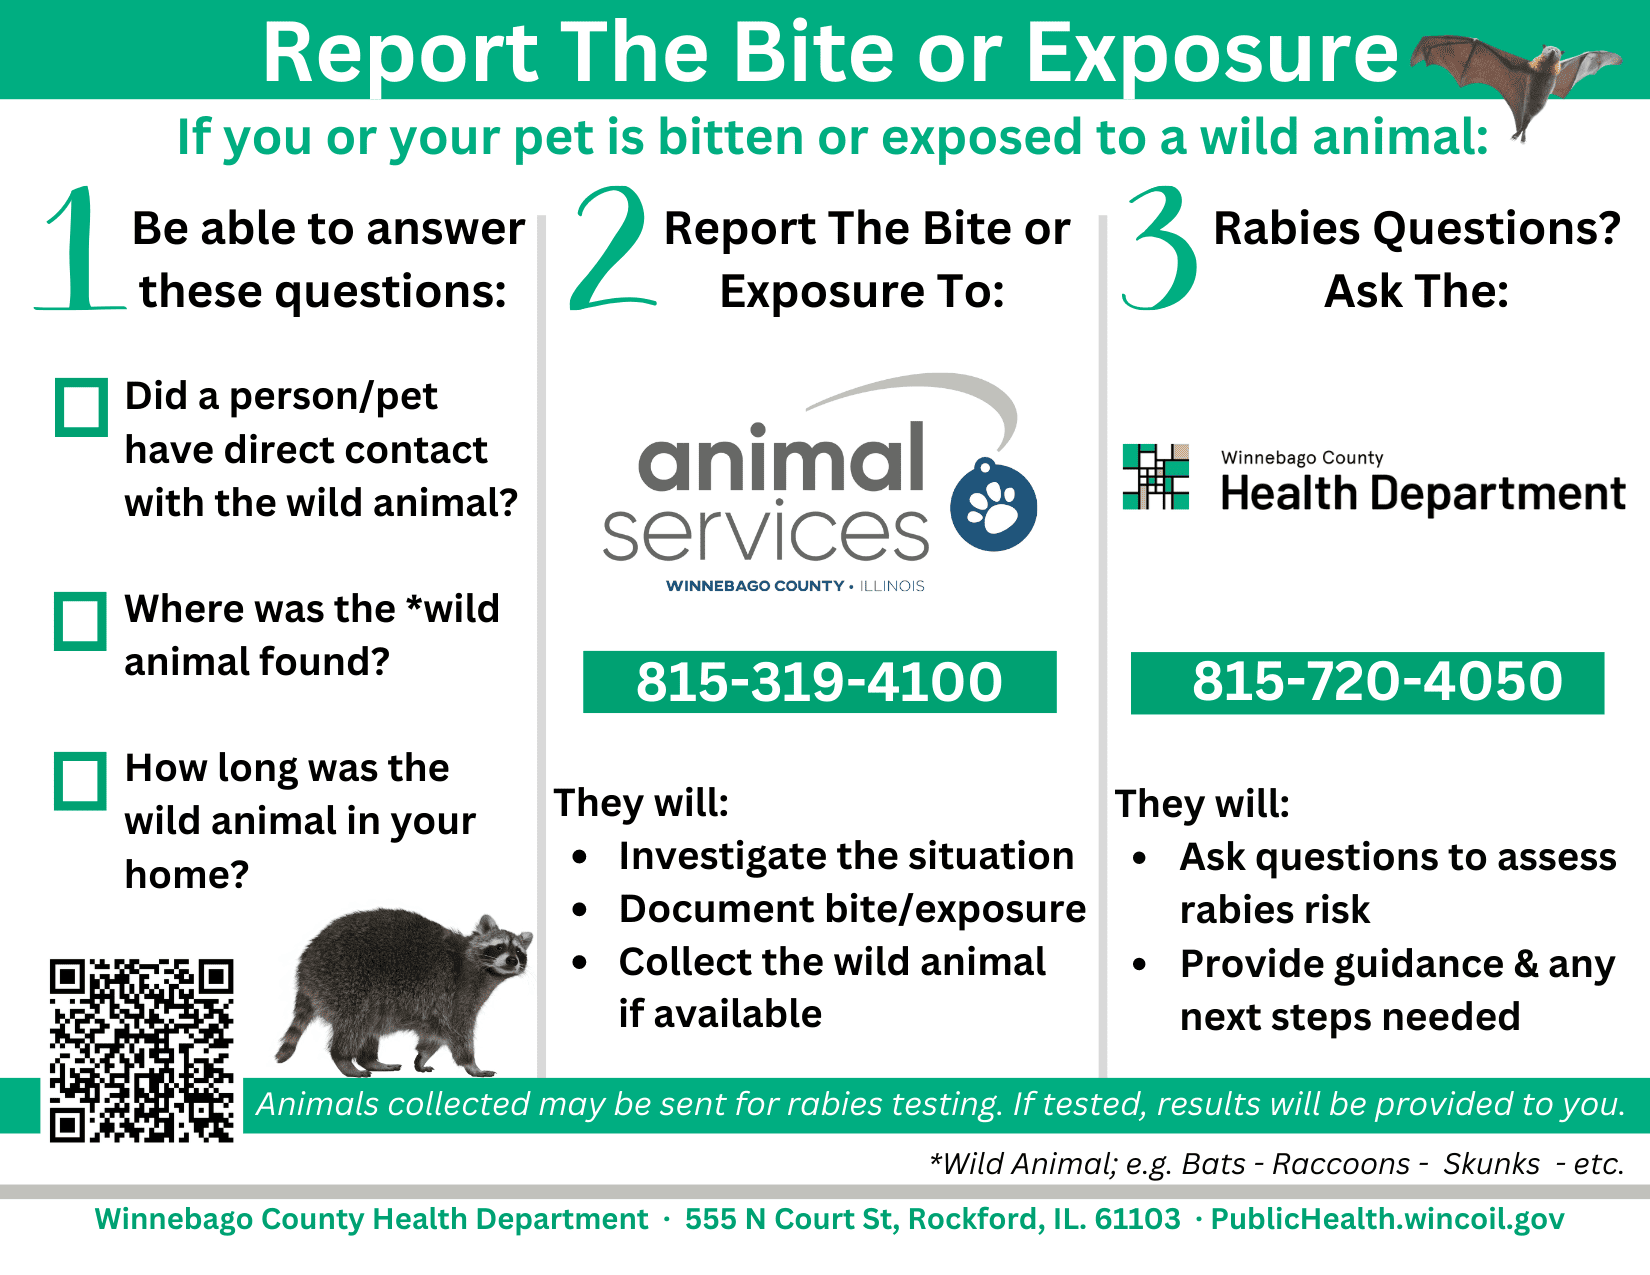 Rabies Guide by WFLA Newschannel8 - Issuu